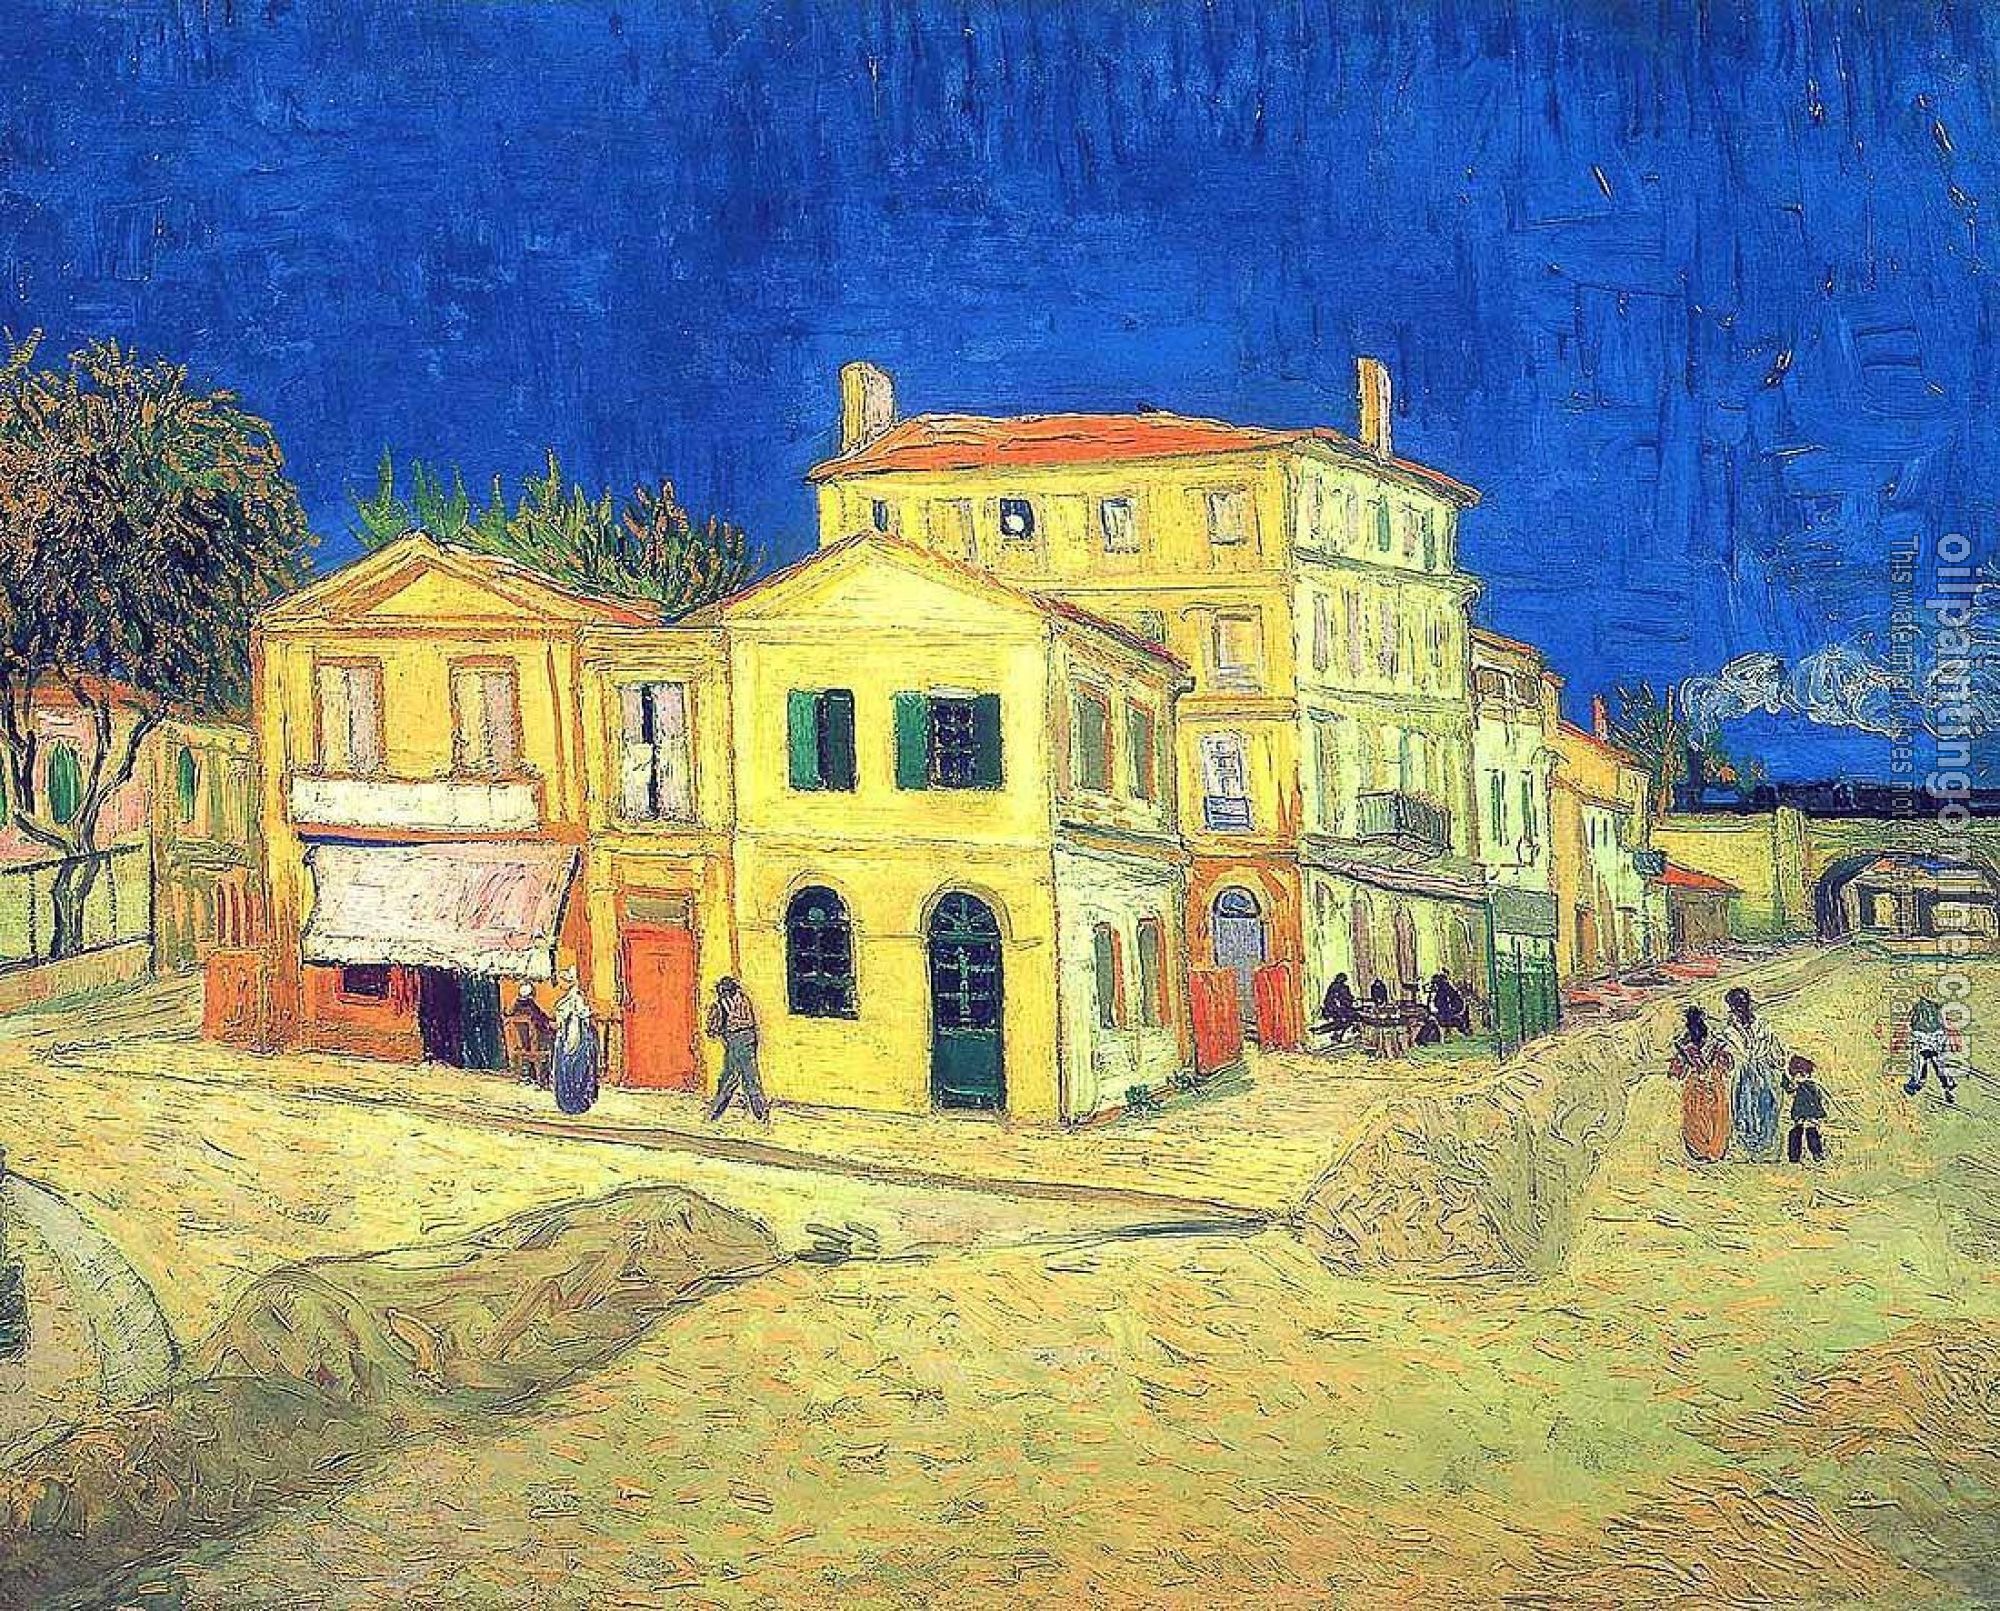 Gogh, Vincent van - Vincent's House in Arles, The Yellow House